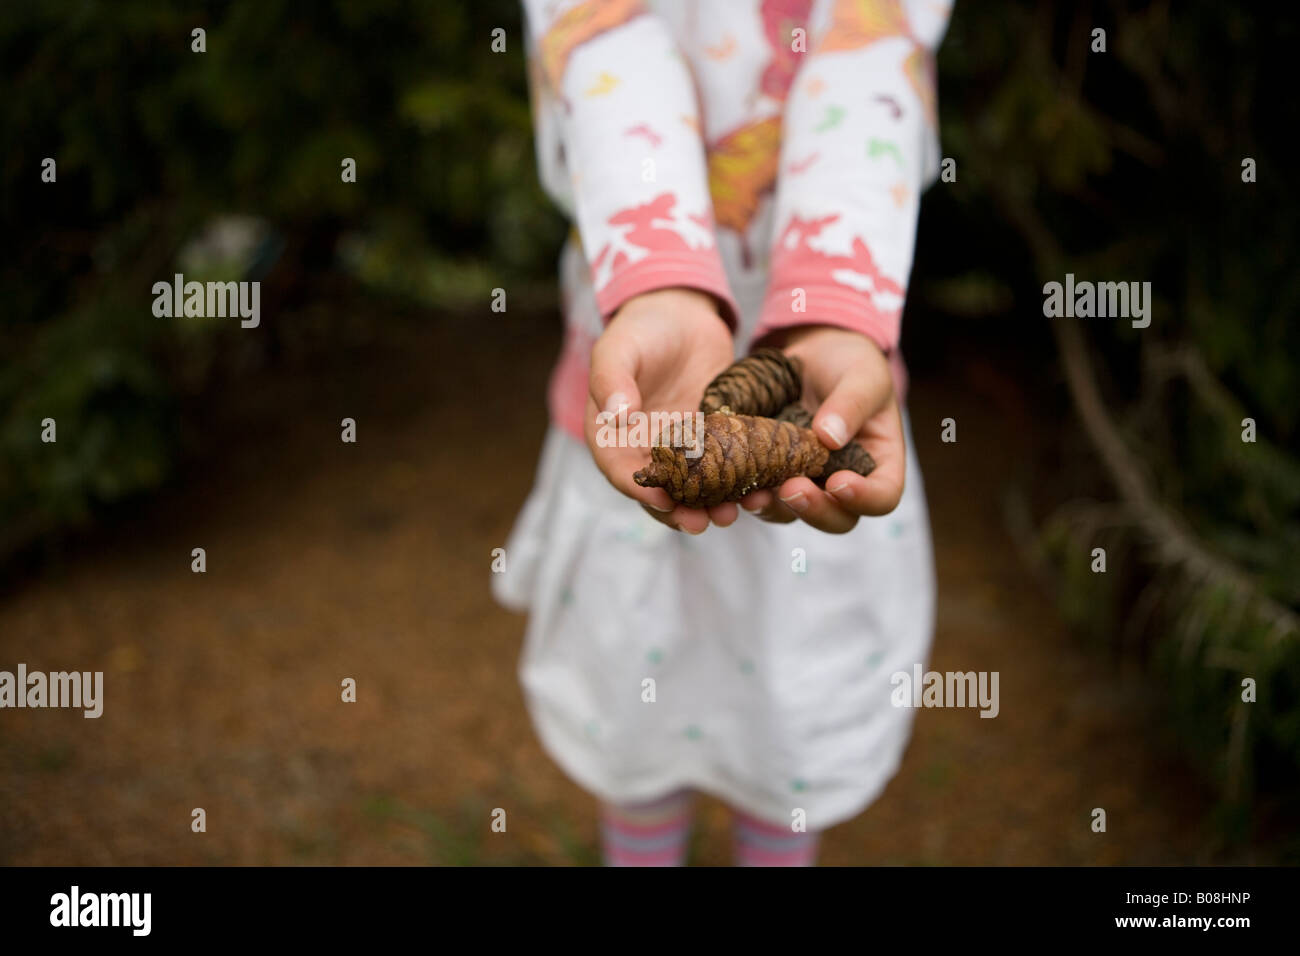 Little girl shows pine cones collected from under a tree in New Zealand Stock Photo